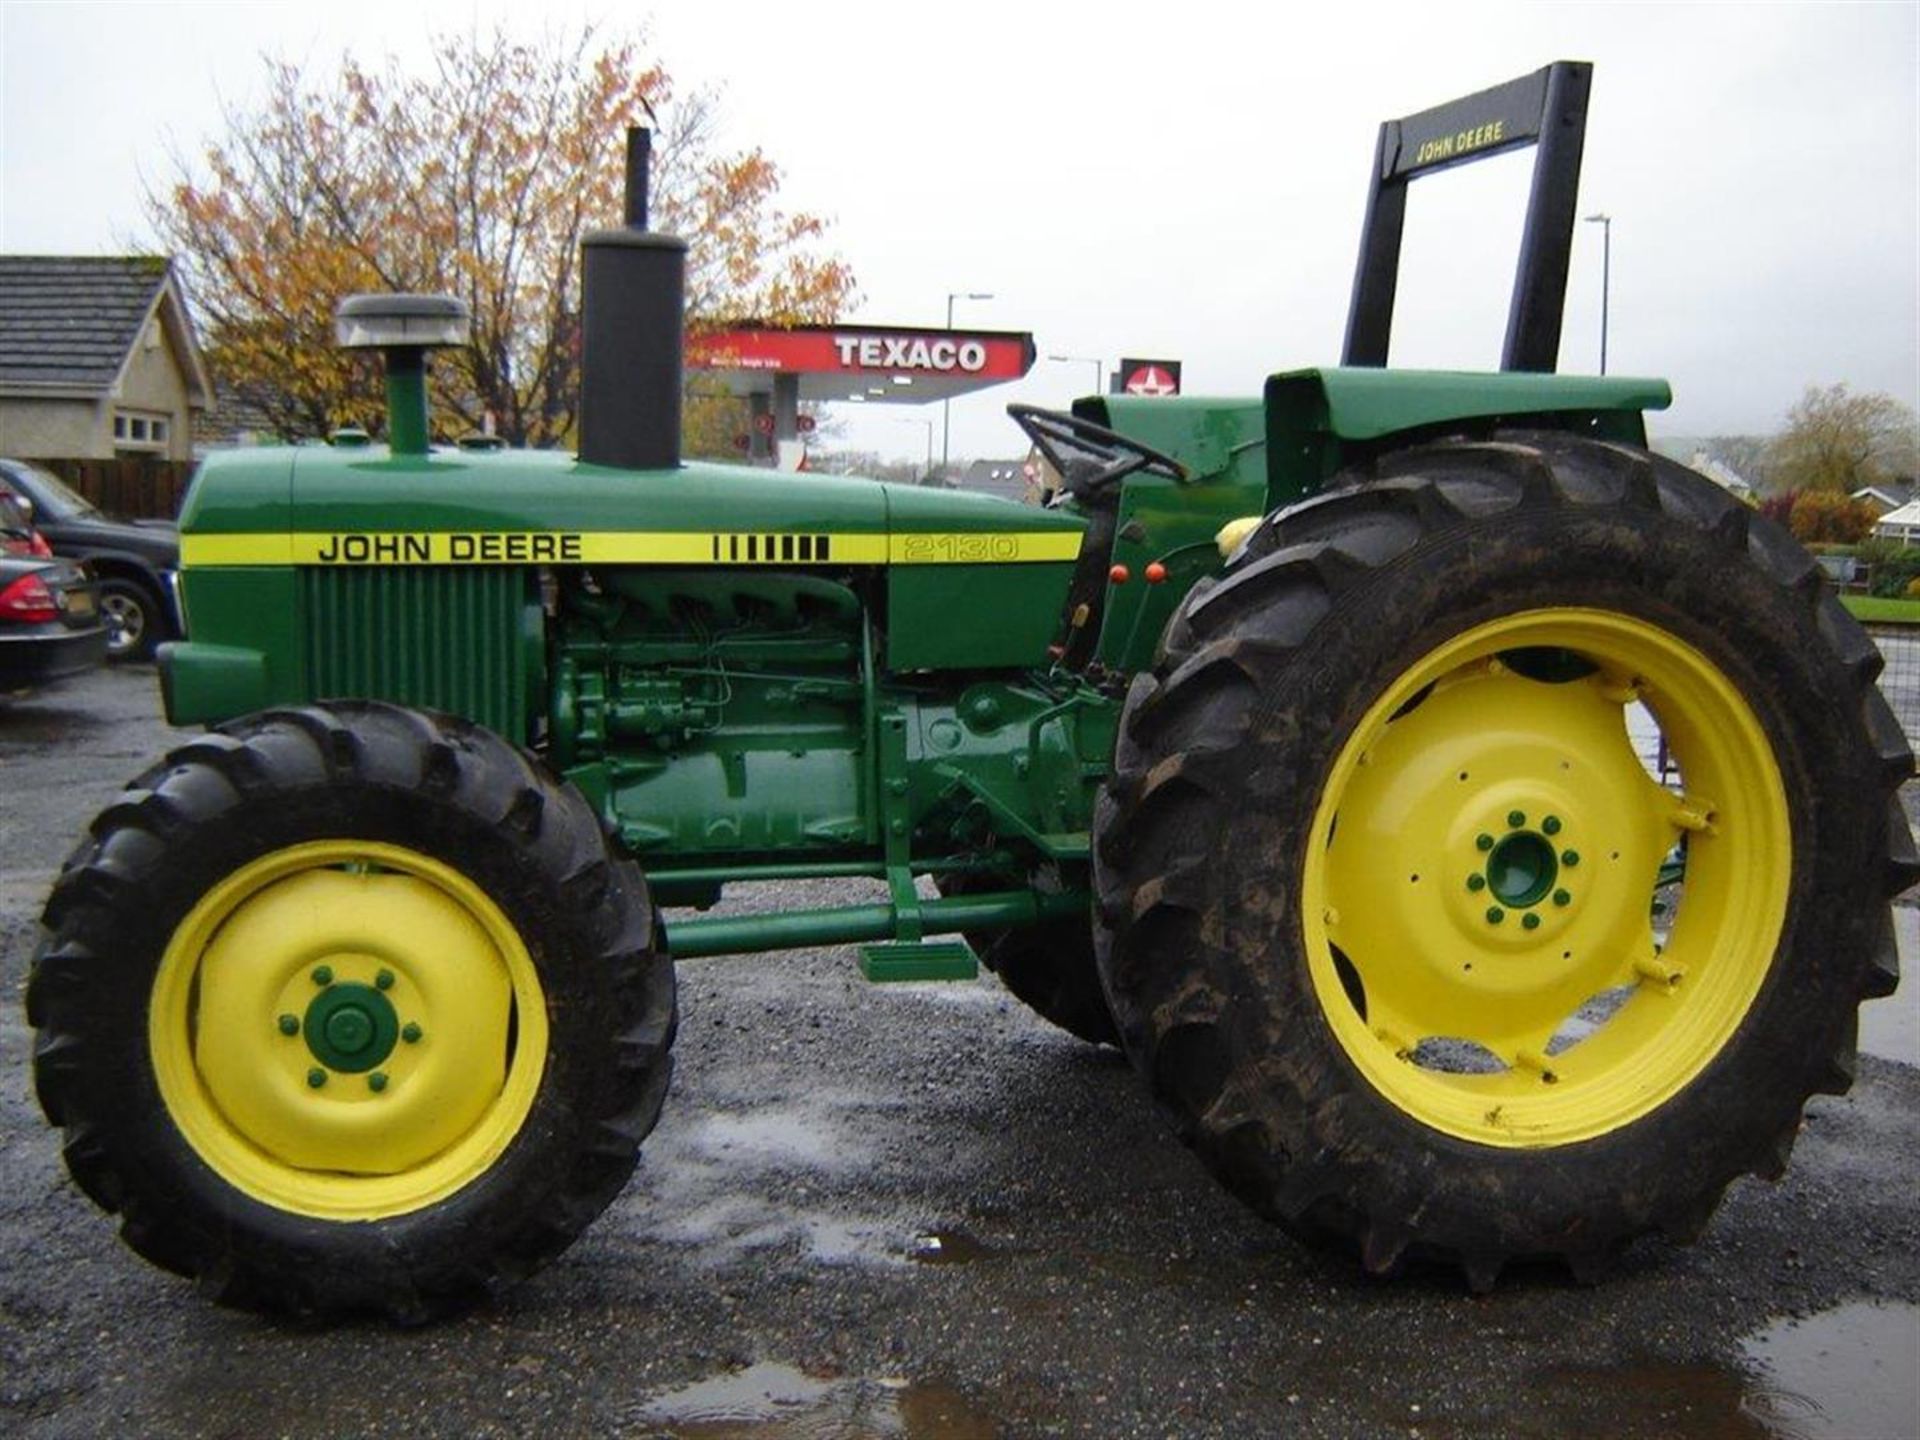 JOHN DEERE 2130 diesel TRACTOR Fitted with mechanical 4wd and spool valves. A well presented example - Image 6 of 6